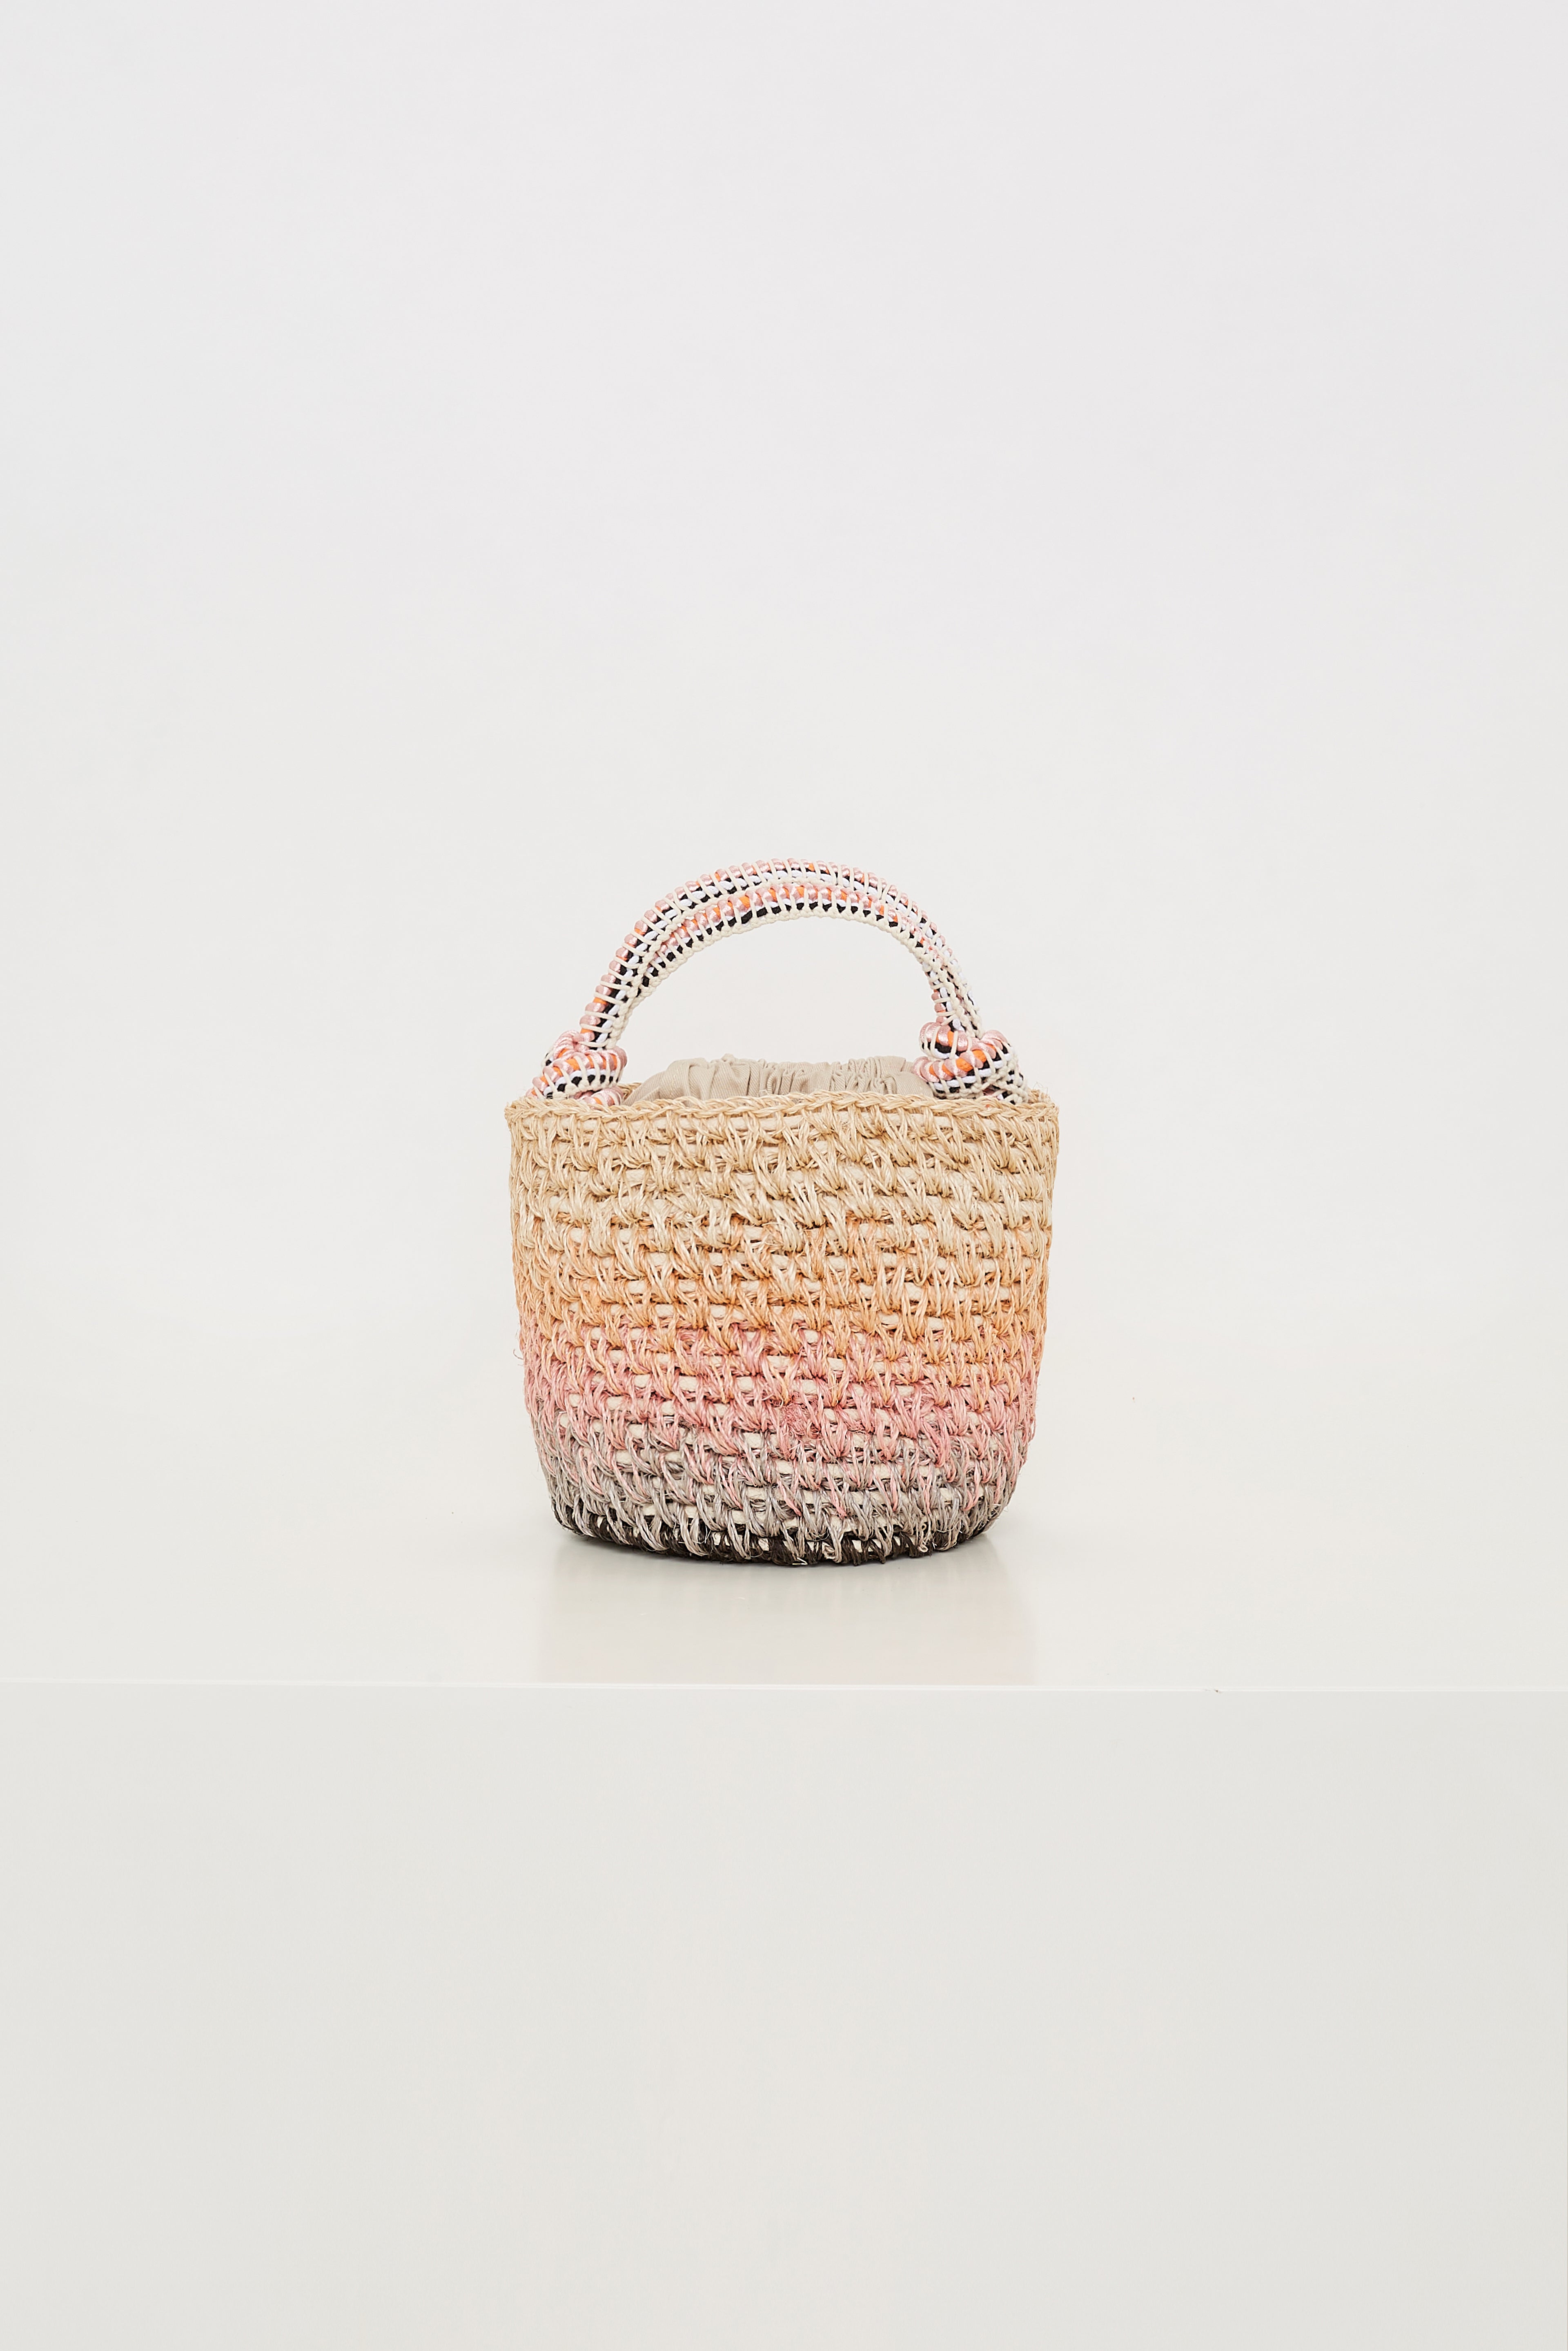 Dorothee-Schumacher-OUTLET-SALE-DEGRADE-DREAMS-mini-straw-bag-Taschen-OS-stripes-mix-ARCHIVE-COLLECTION-2.jpg